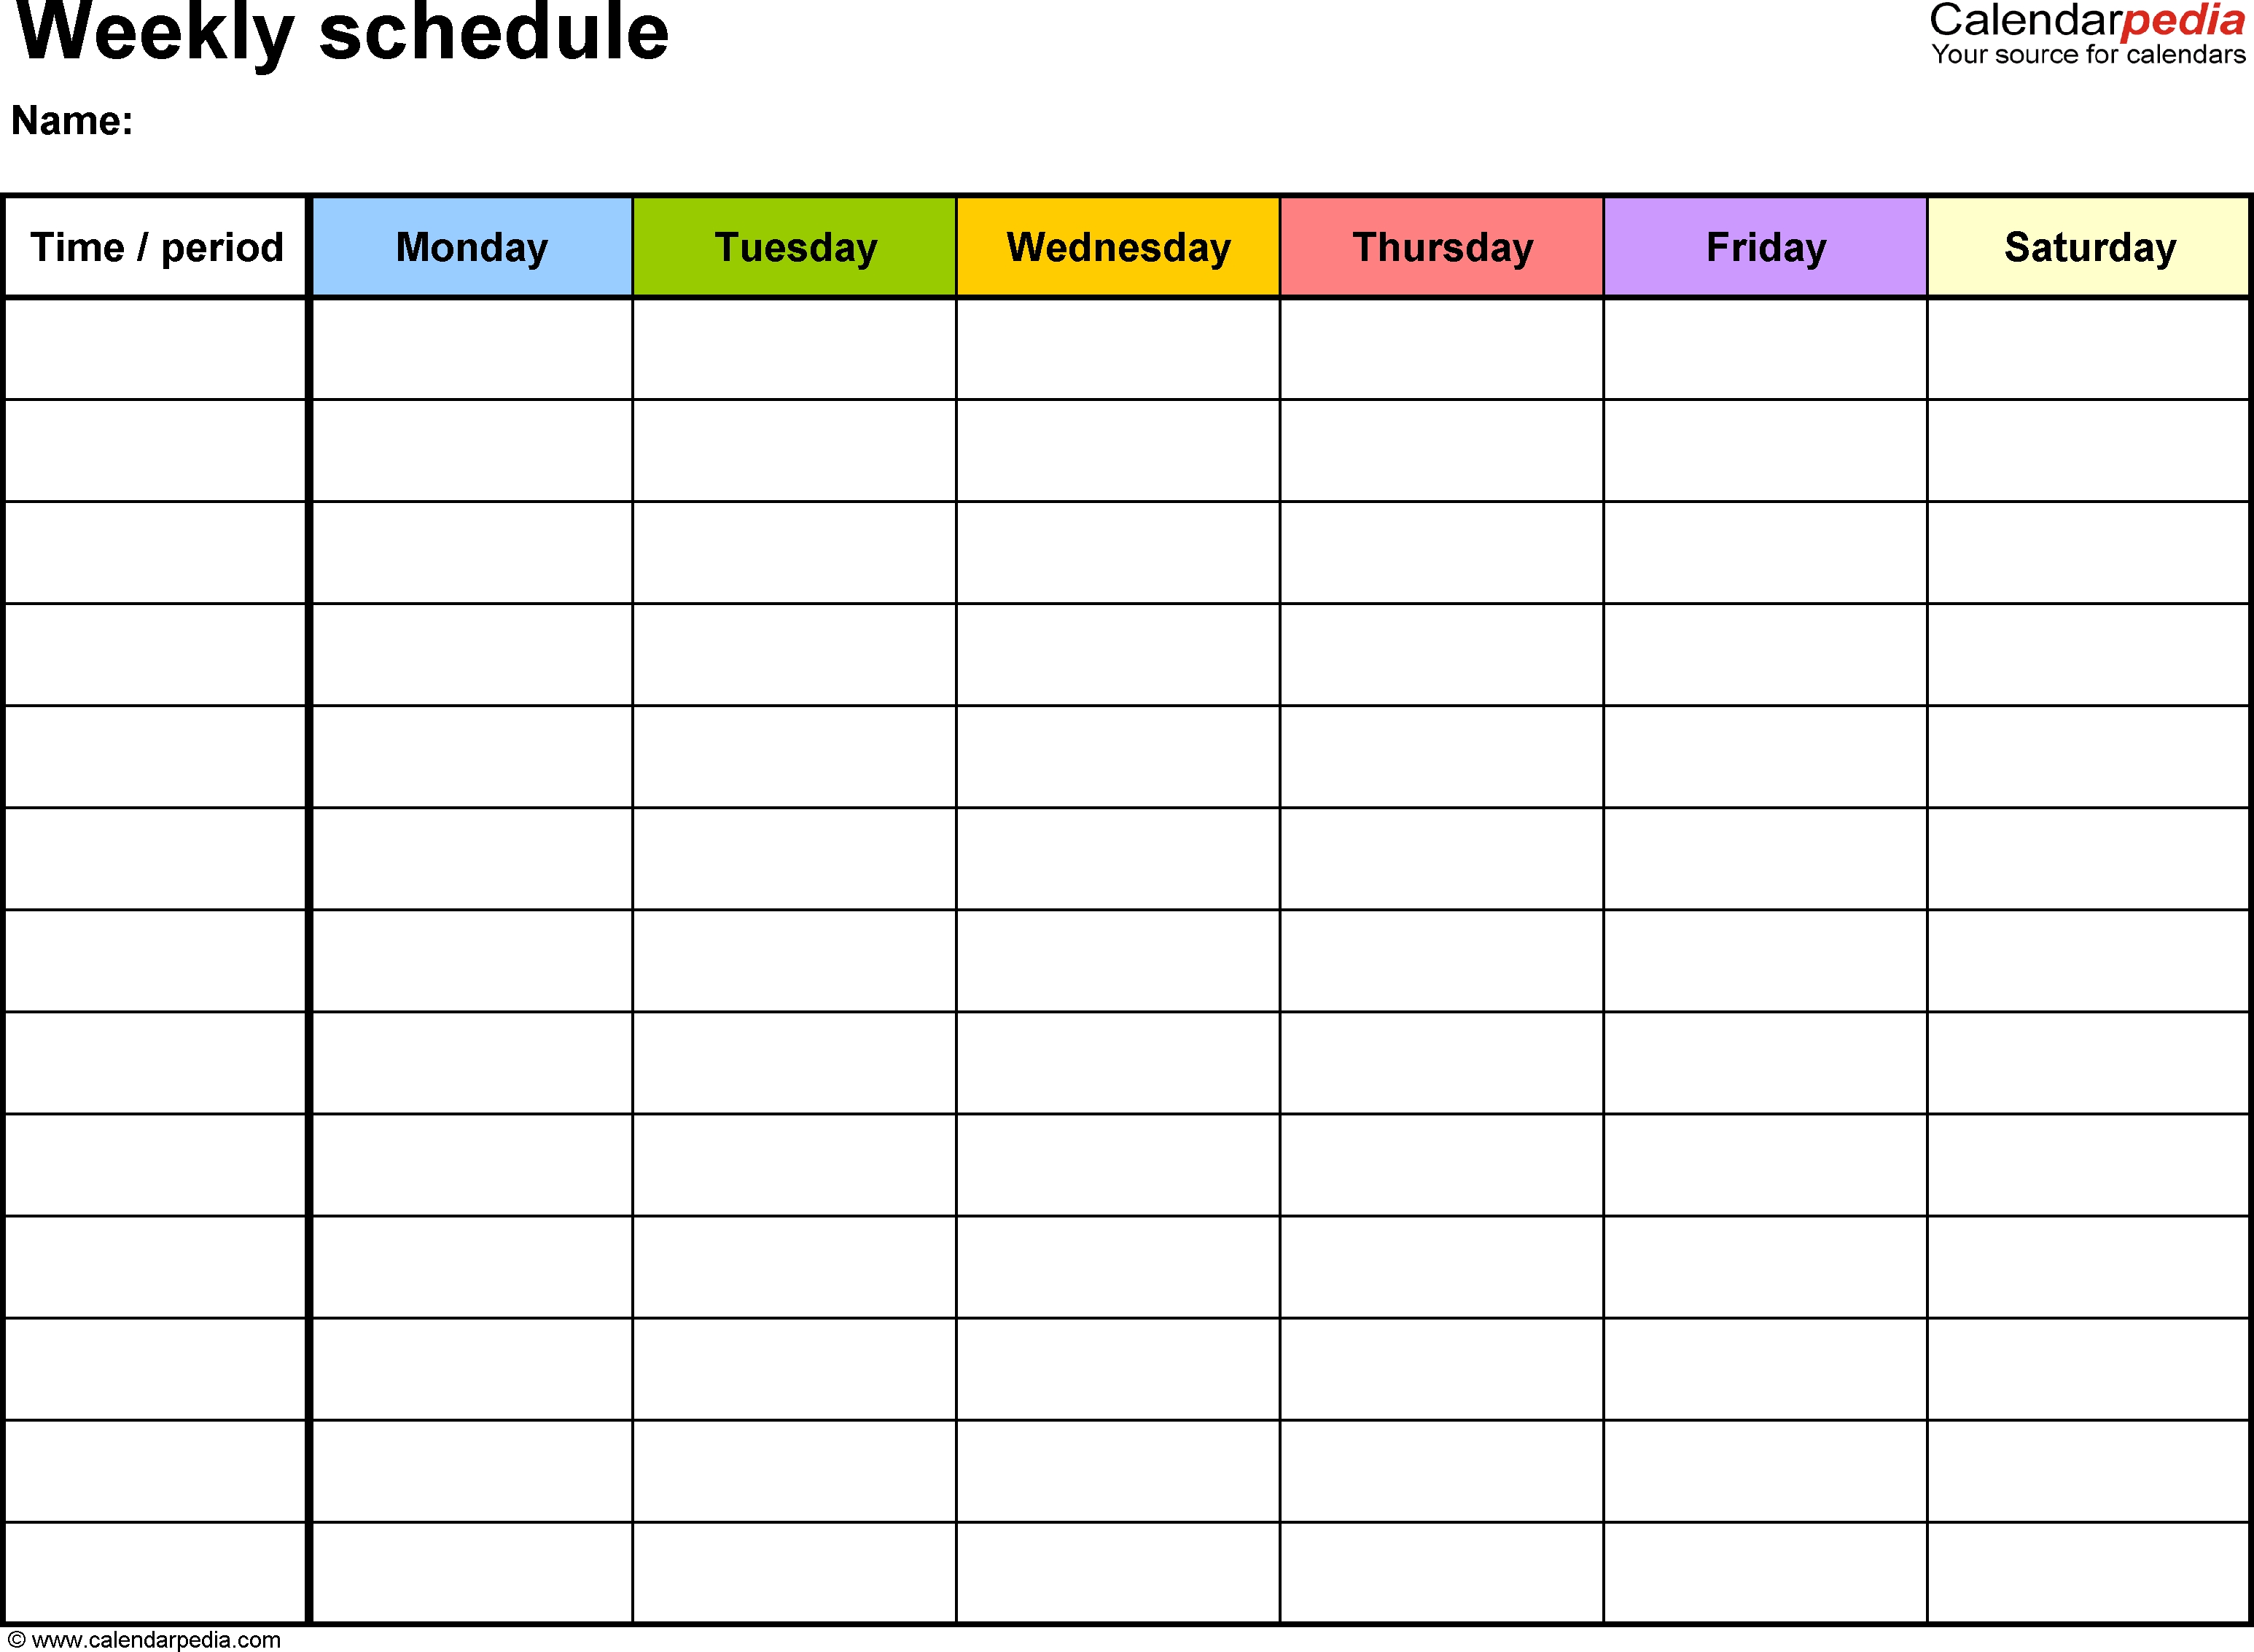 Free Weekly Schedule Templates For Word - 18 Templates pertaining to Free Printable 5 Day Calendar